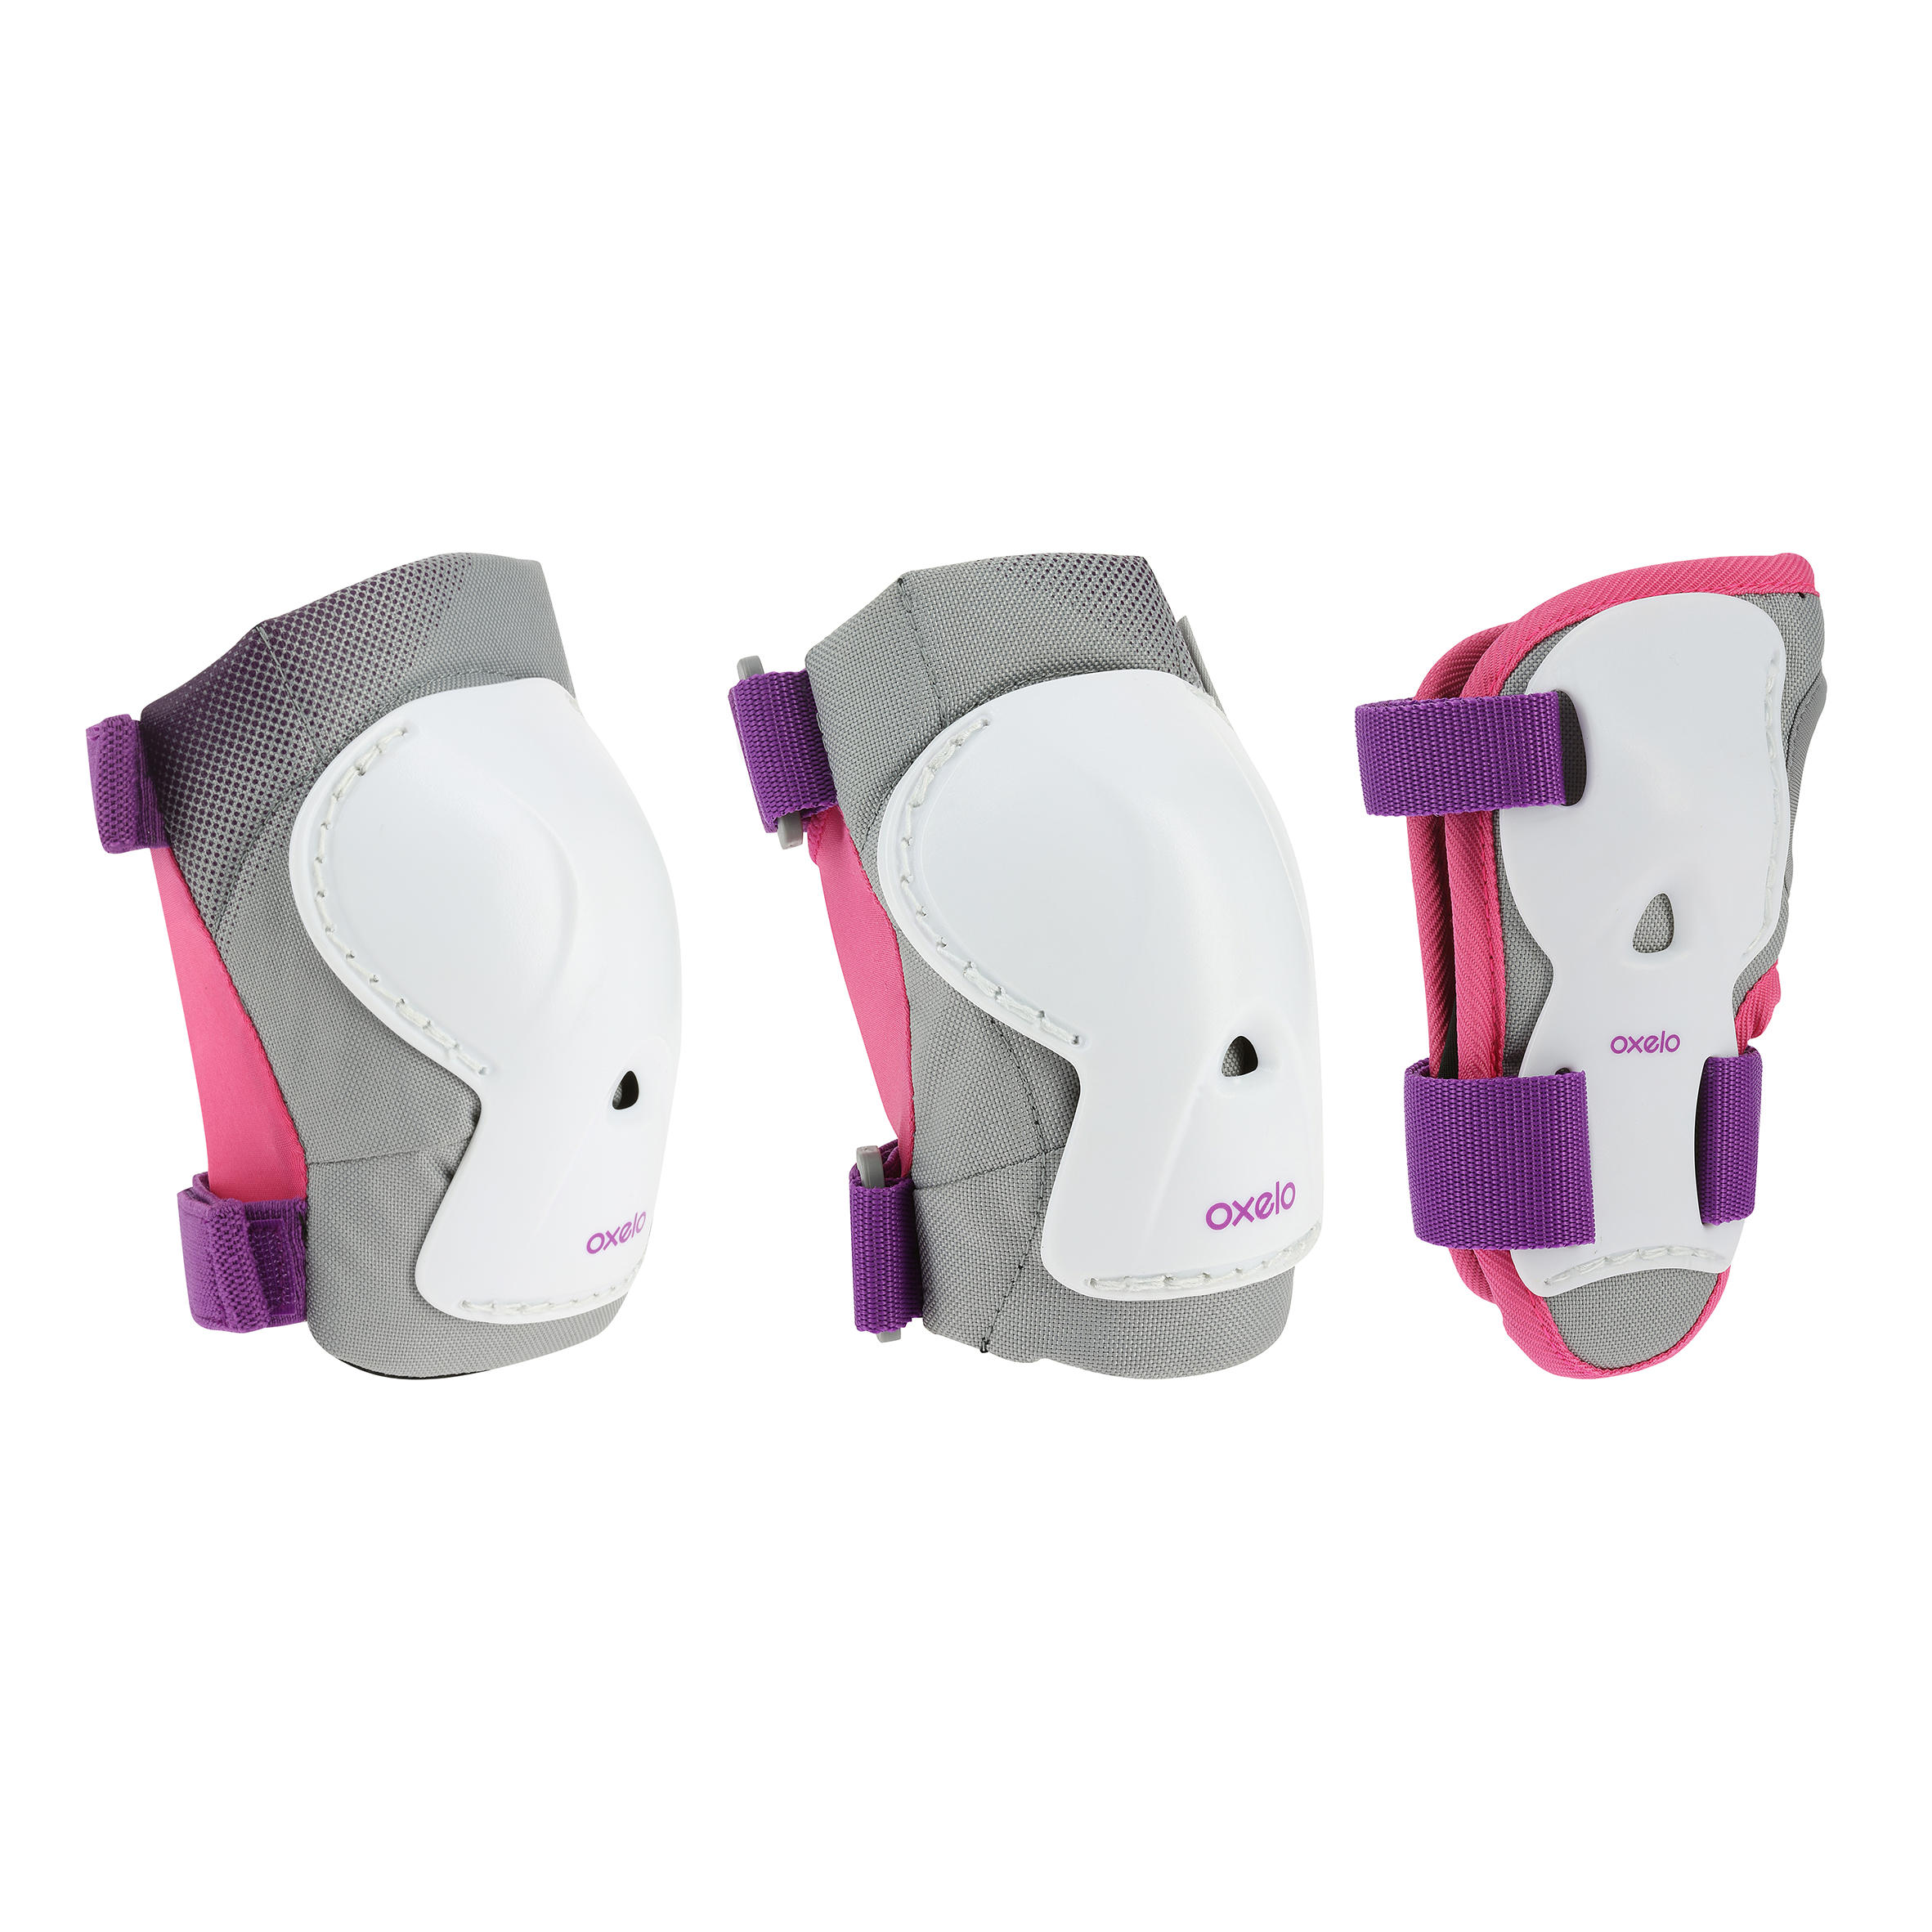 OXELO Play Kids' 3-Piece Skating Skateboarding Scooter Protective Gear - Purple